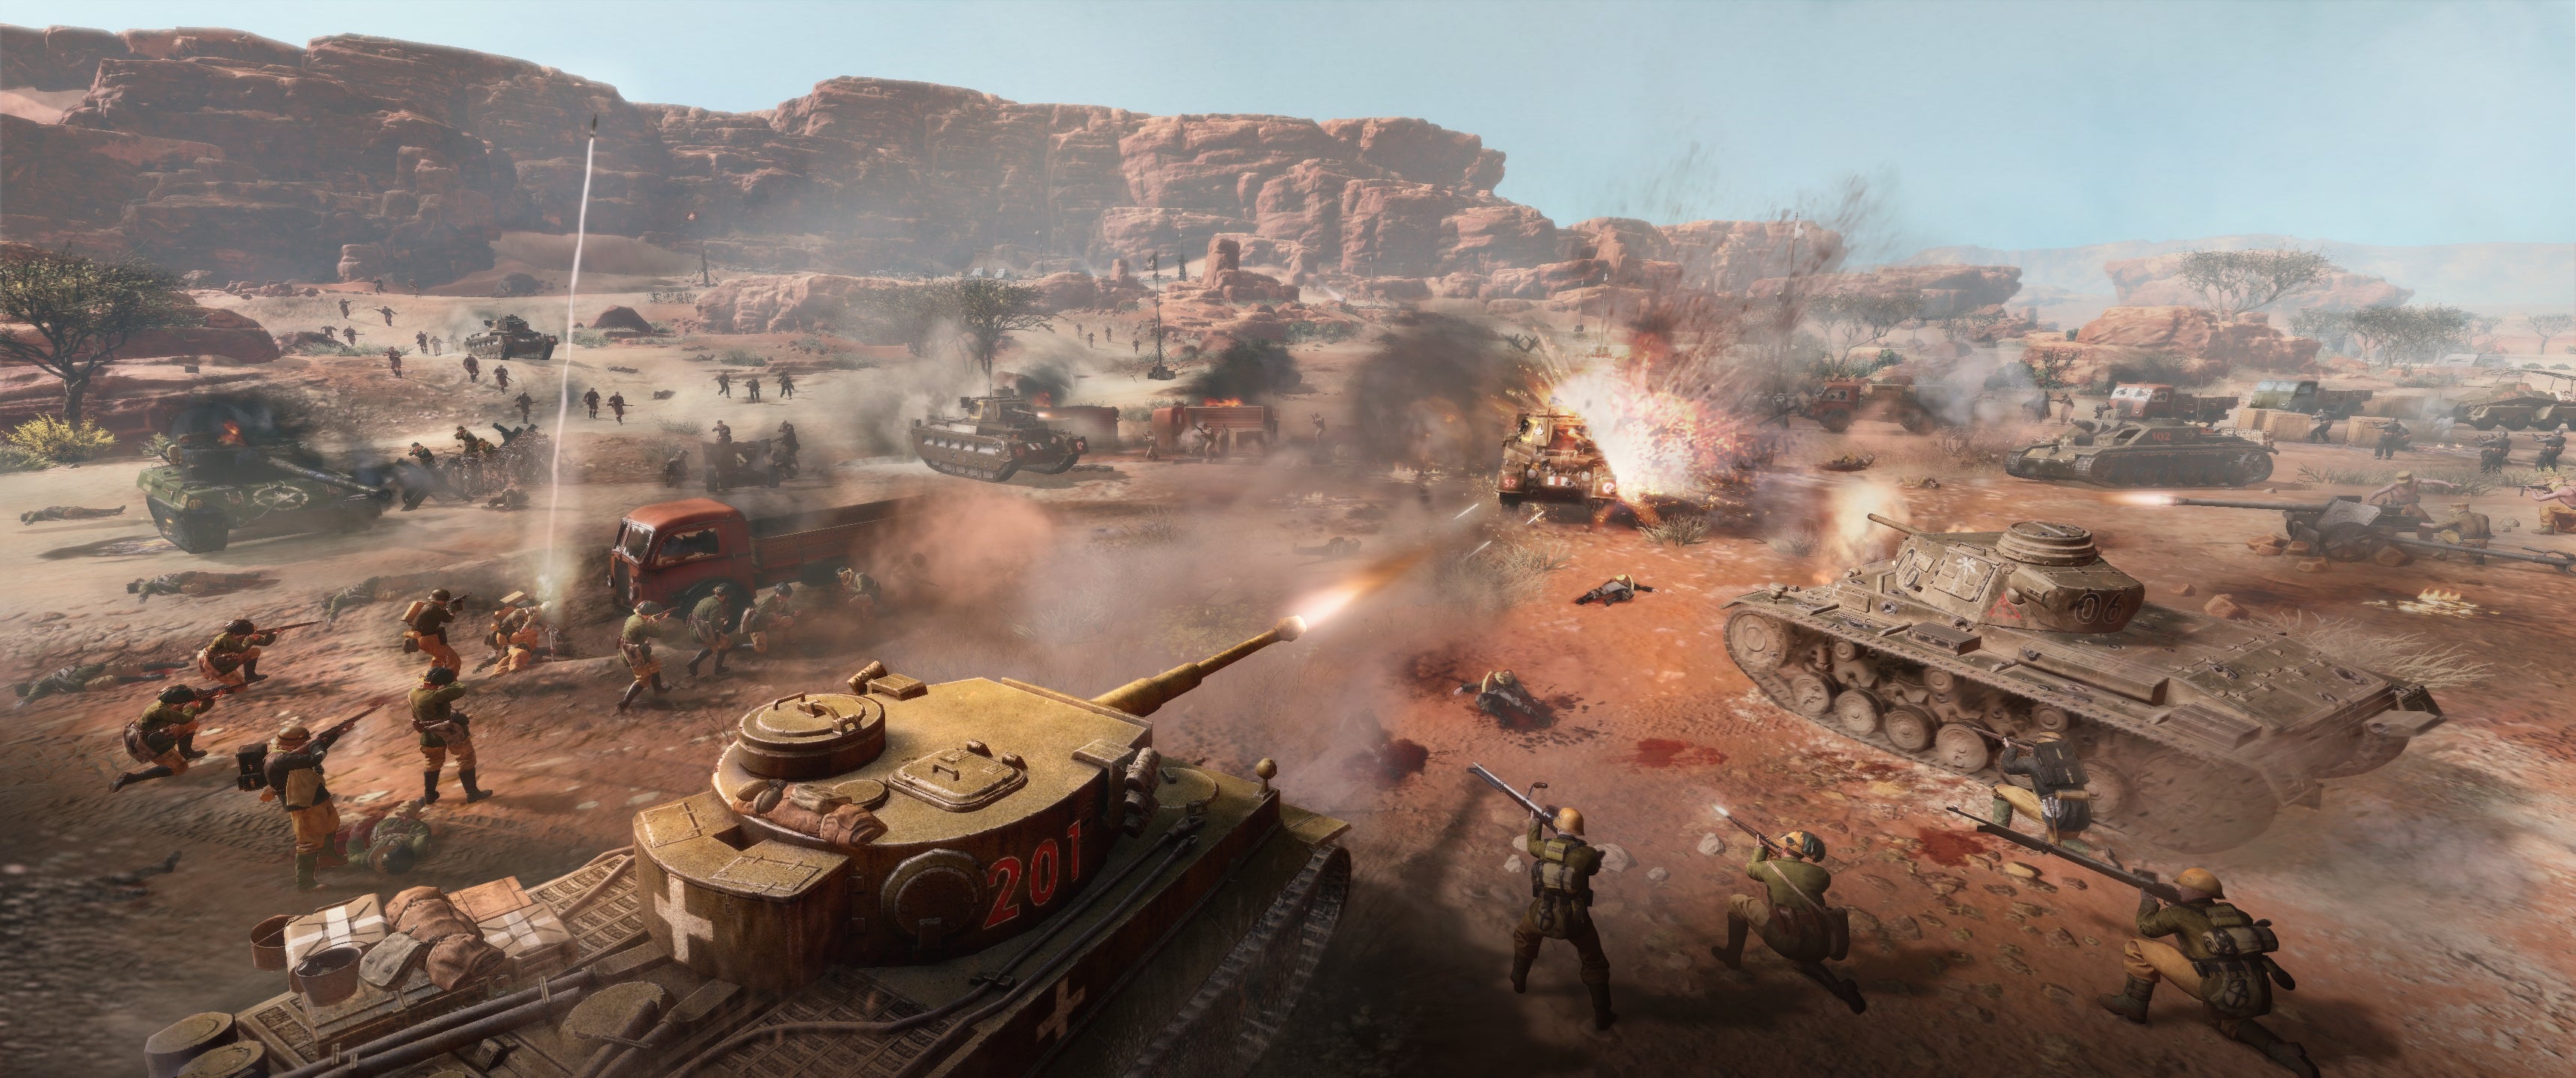 Company of Heroes 3 Preview - Edited Action Shot of Desert Tank Warfare and Campbell's Convoy